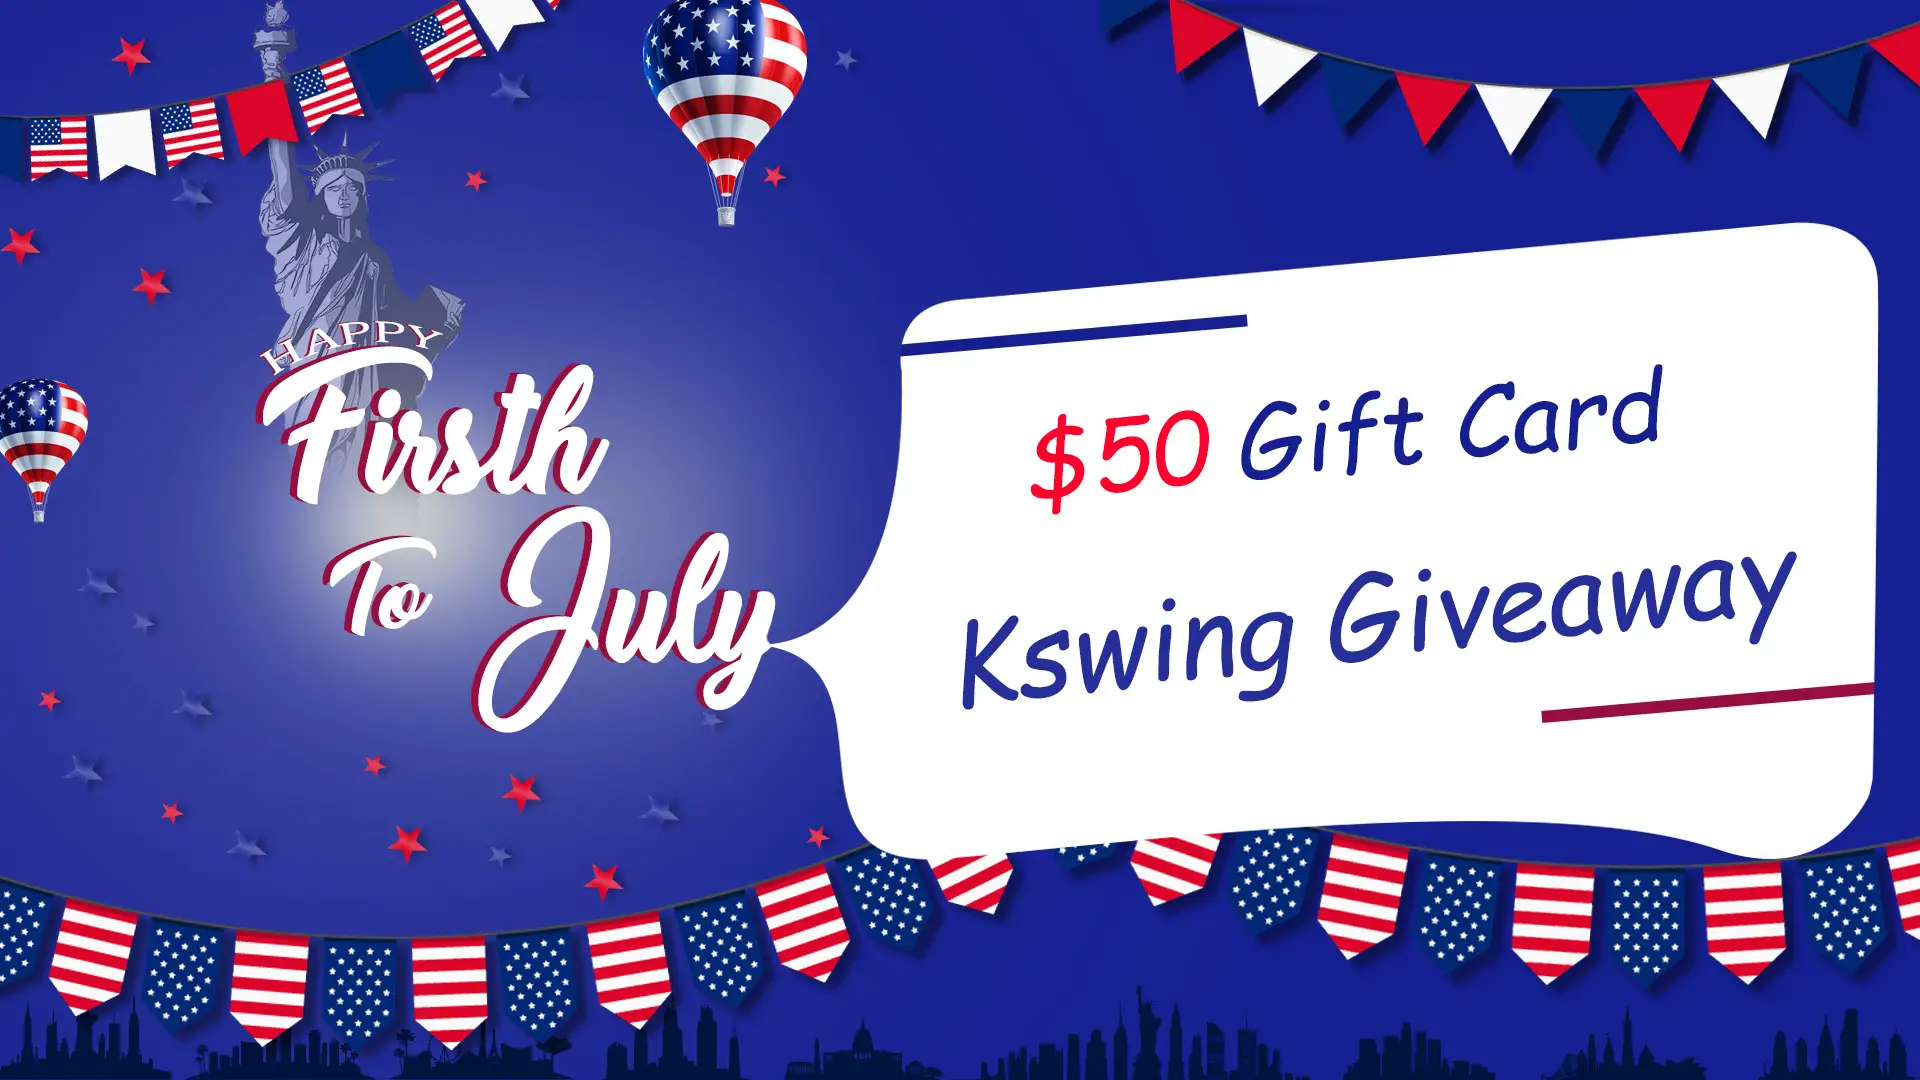 Enter for your chance to win a $50 gift card in the Kswing Independence Day Giveaway. They will randomly select 10 lucky winners in July 14th. Don't miss this opportunity to win the $50 gift card. Don't forget to include the following hashtags in your entry: #IndependenceDay #giveaway